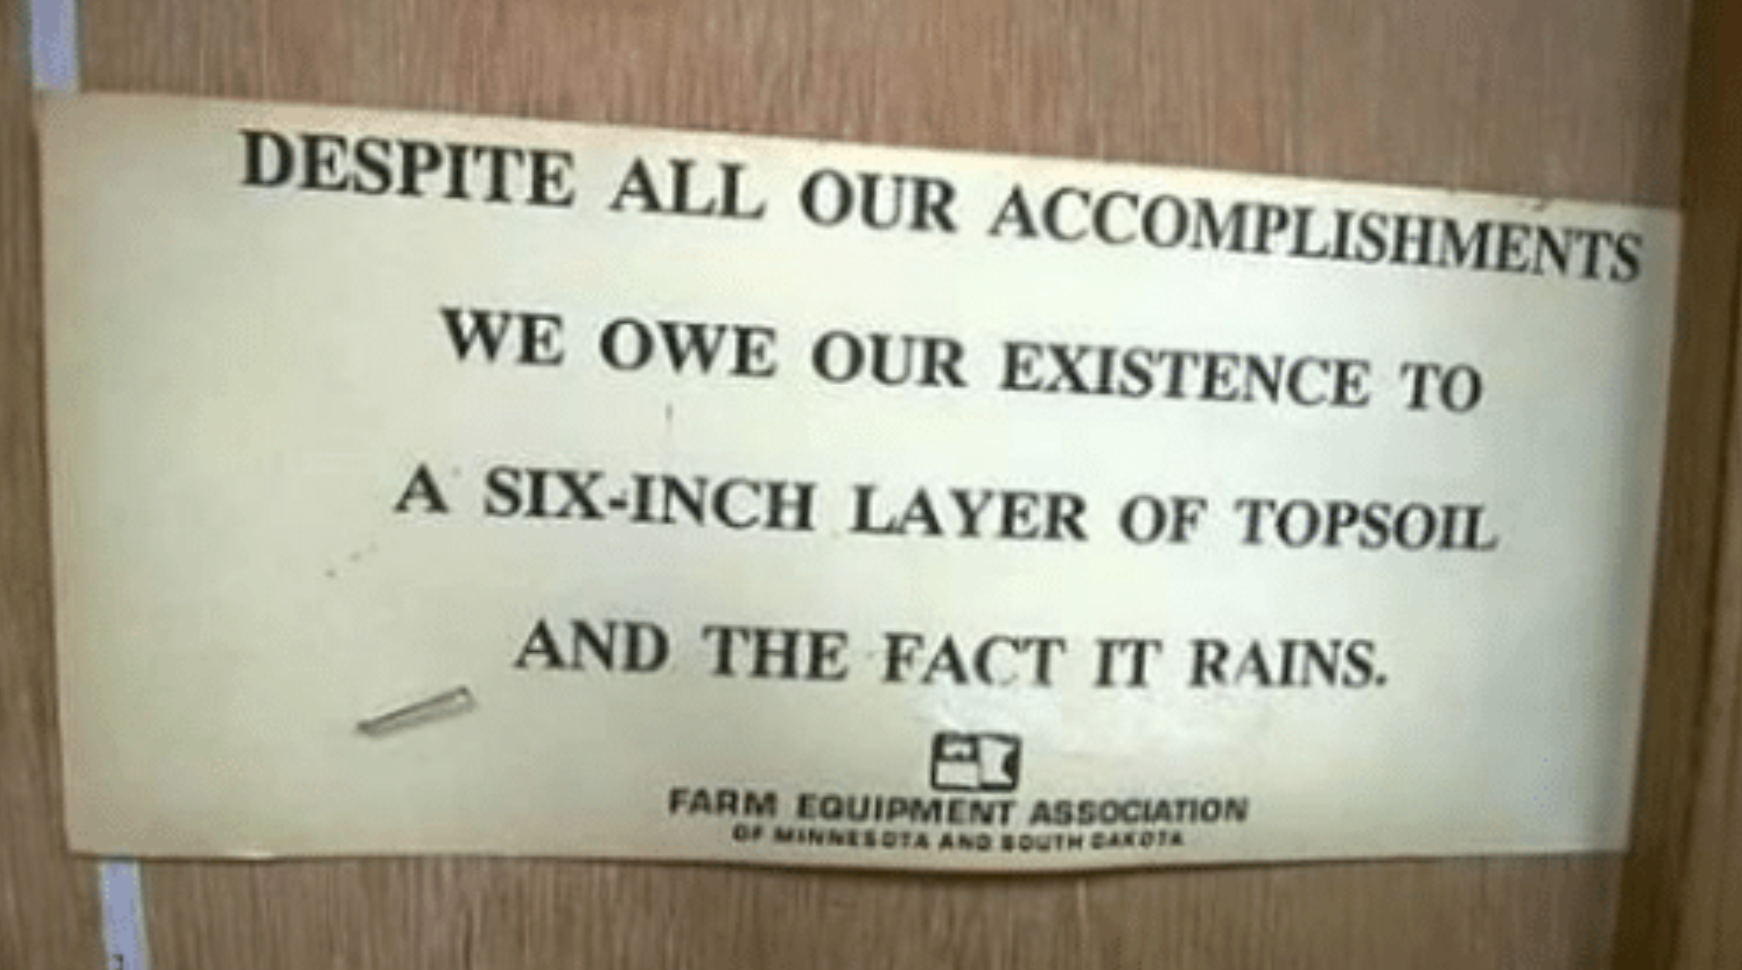 Despite all our accomplishments, we owe our existence to a six-inch layer of topsoil and the fact it rains.